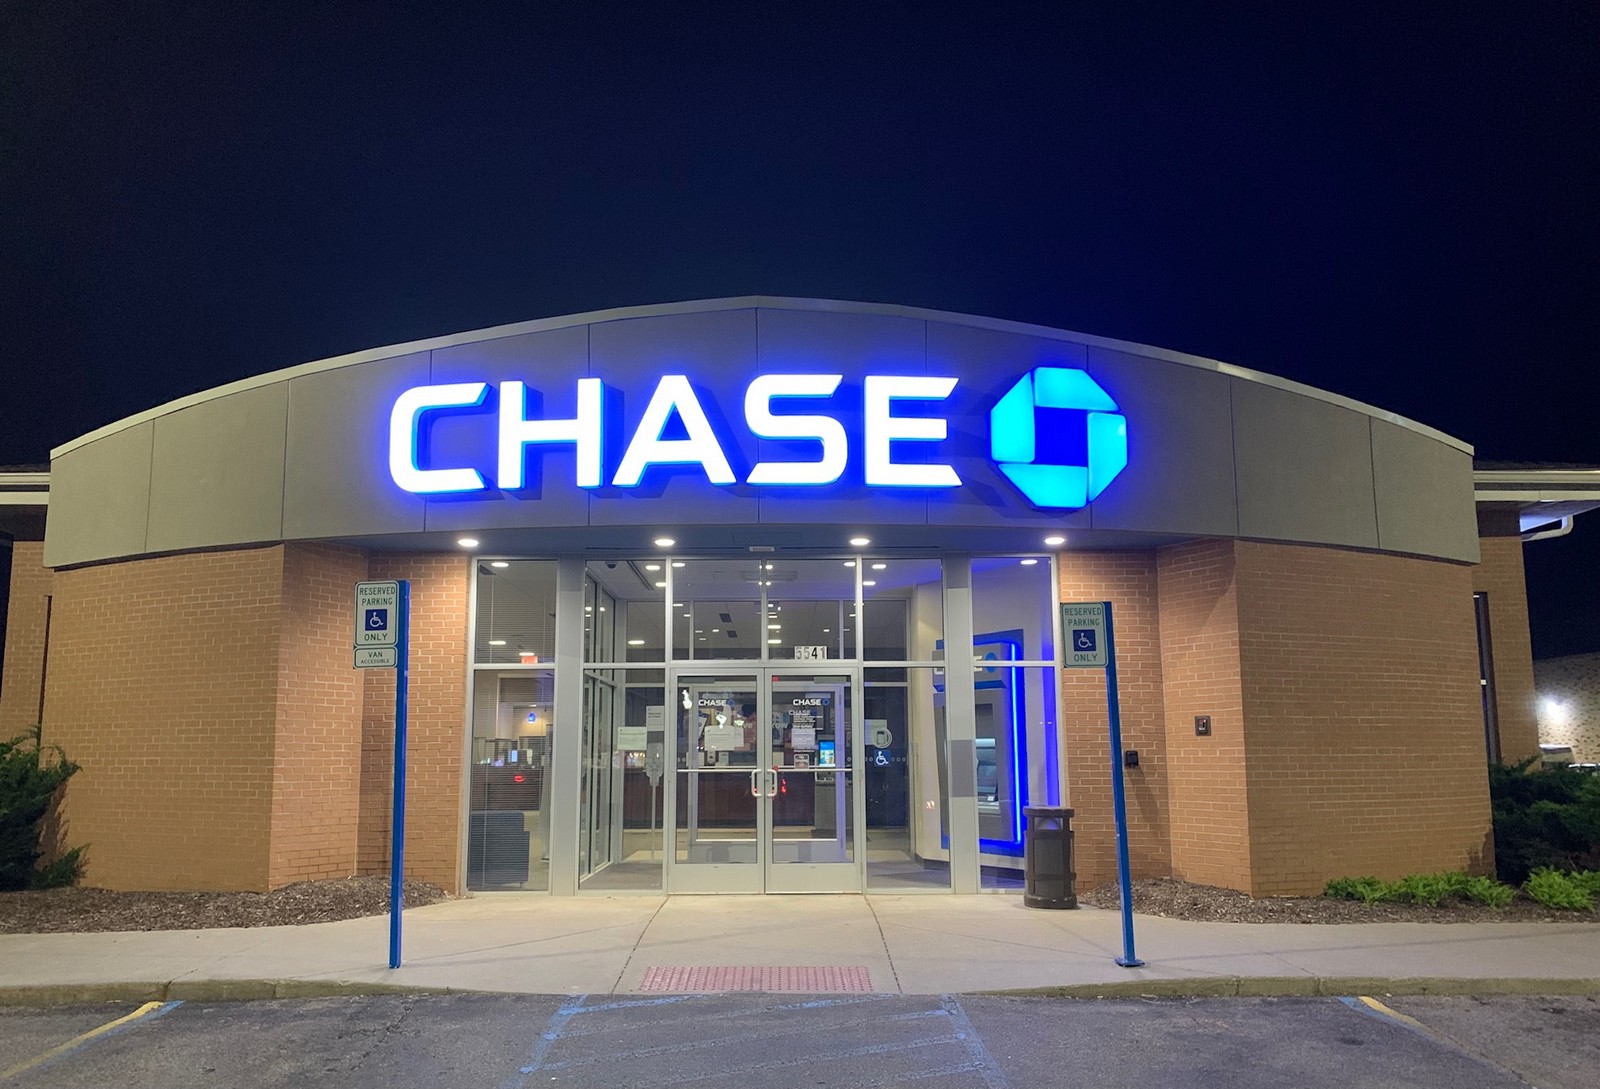 New Offers for Chase Freedom Cards